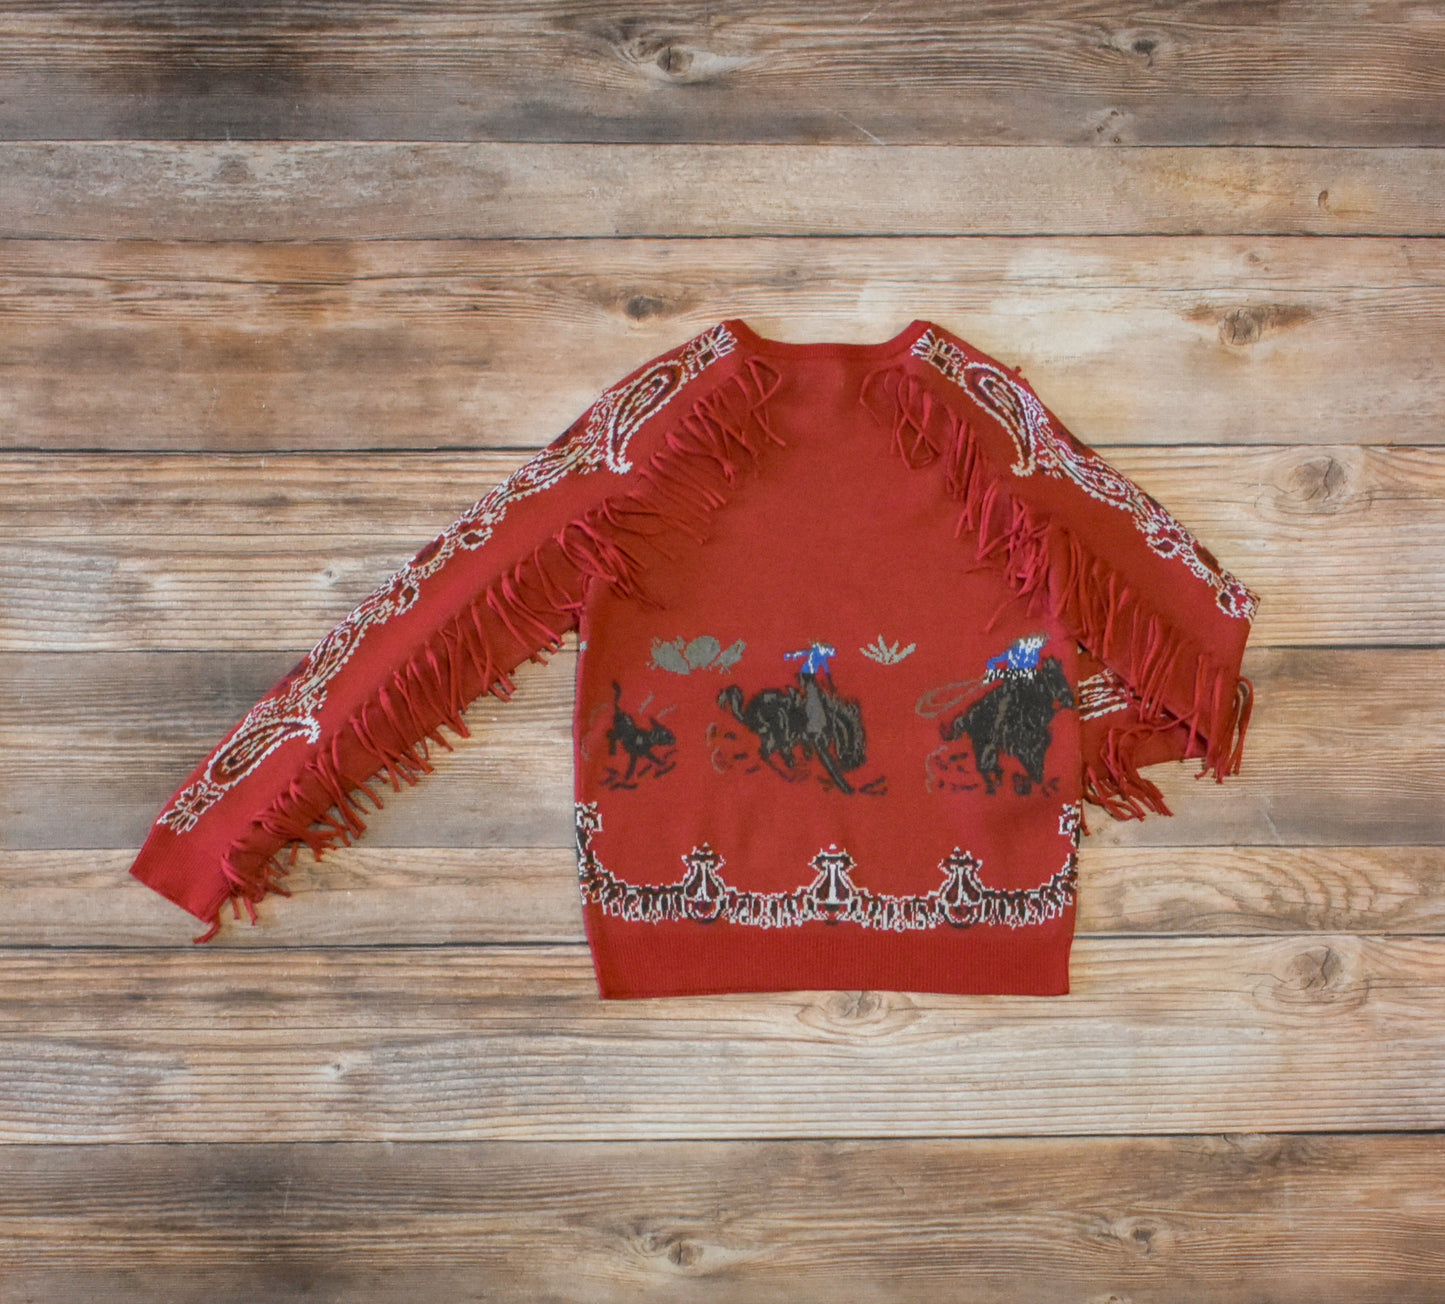 Load image into Gallery viewer, Tasha Polizzi Howdy Red Pullover Sweater at 6Whiskey six whisky womens fringe and horse knit sweater
